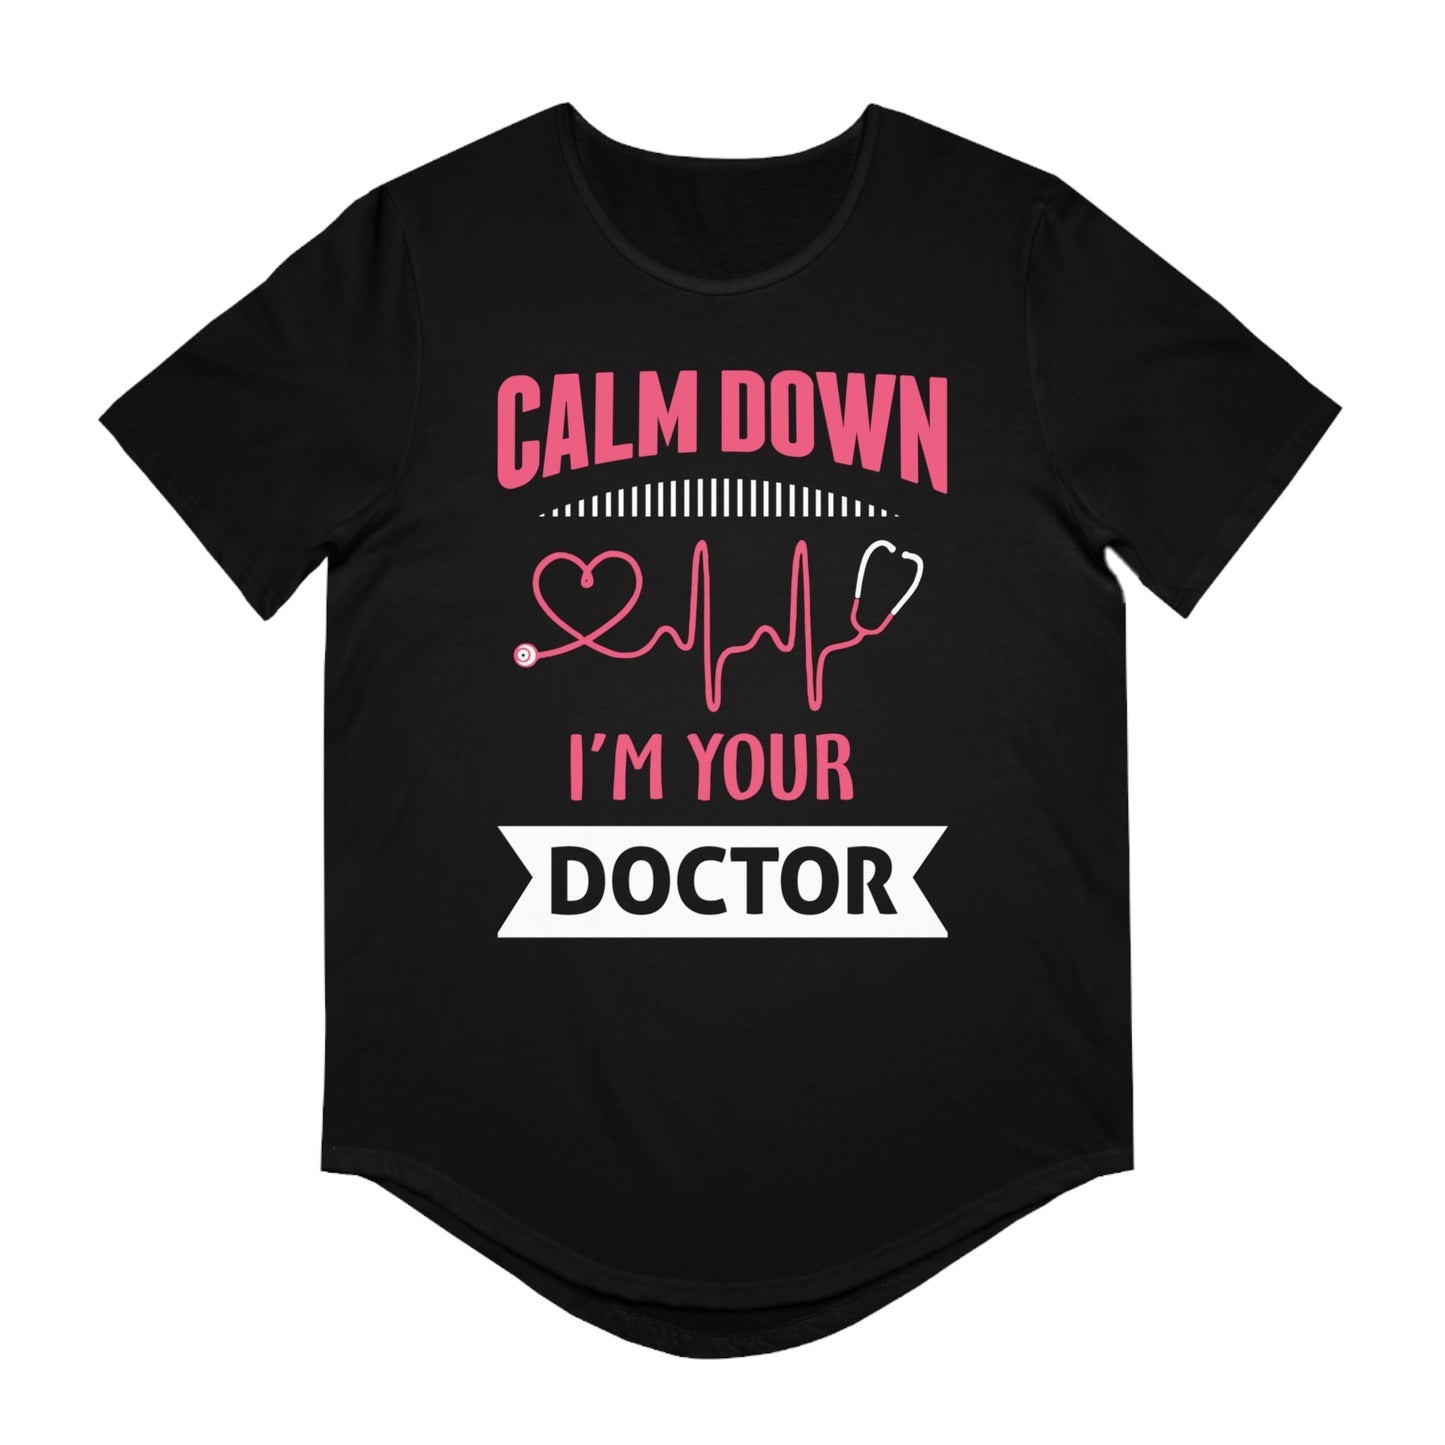 Calm Down I'm Your Doctor Men's Jersey Curved Hem Tee, Doctor shirts, Doctor gift ideas, New Doctor shirt, doctors gift, Doctor team shirt